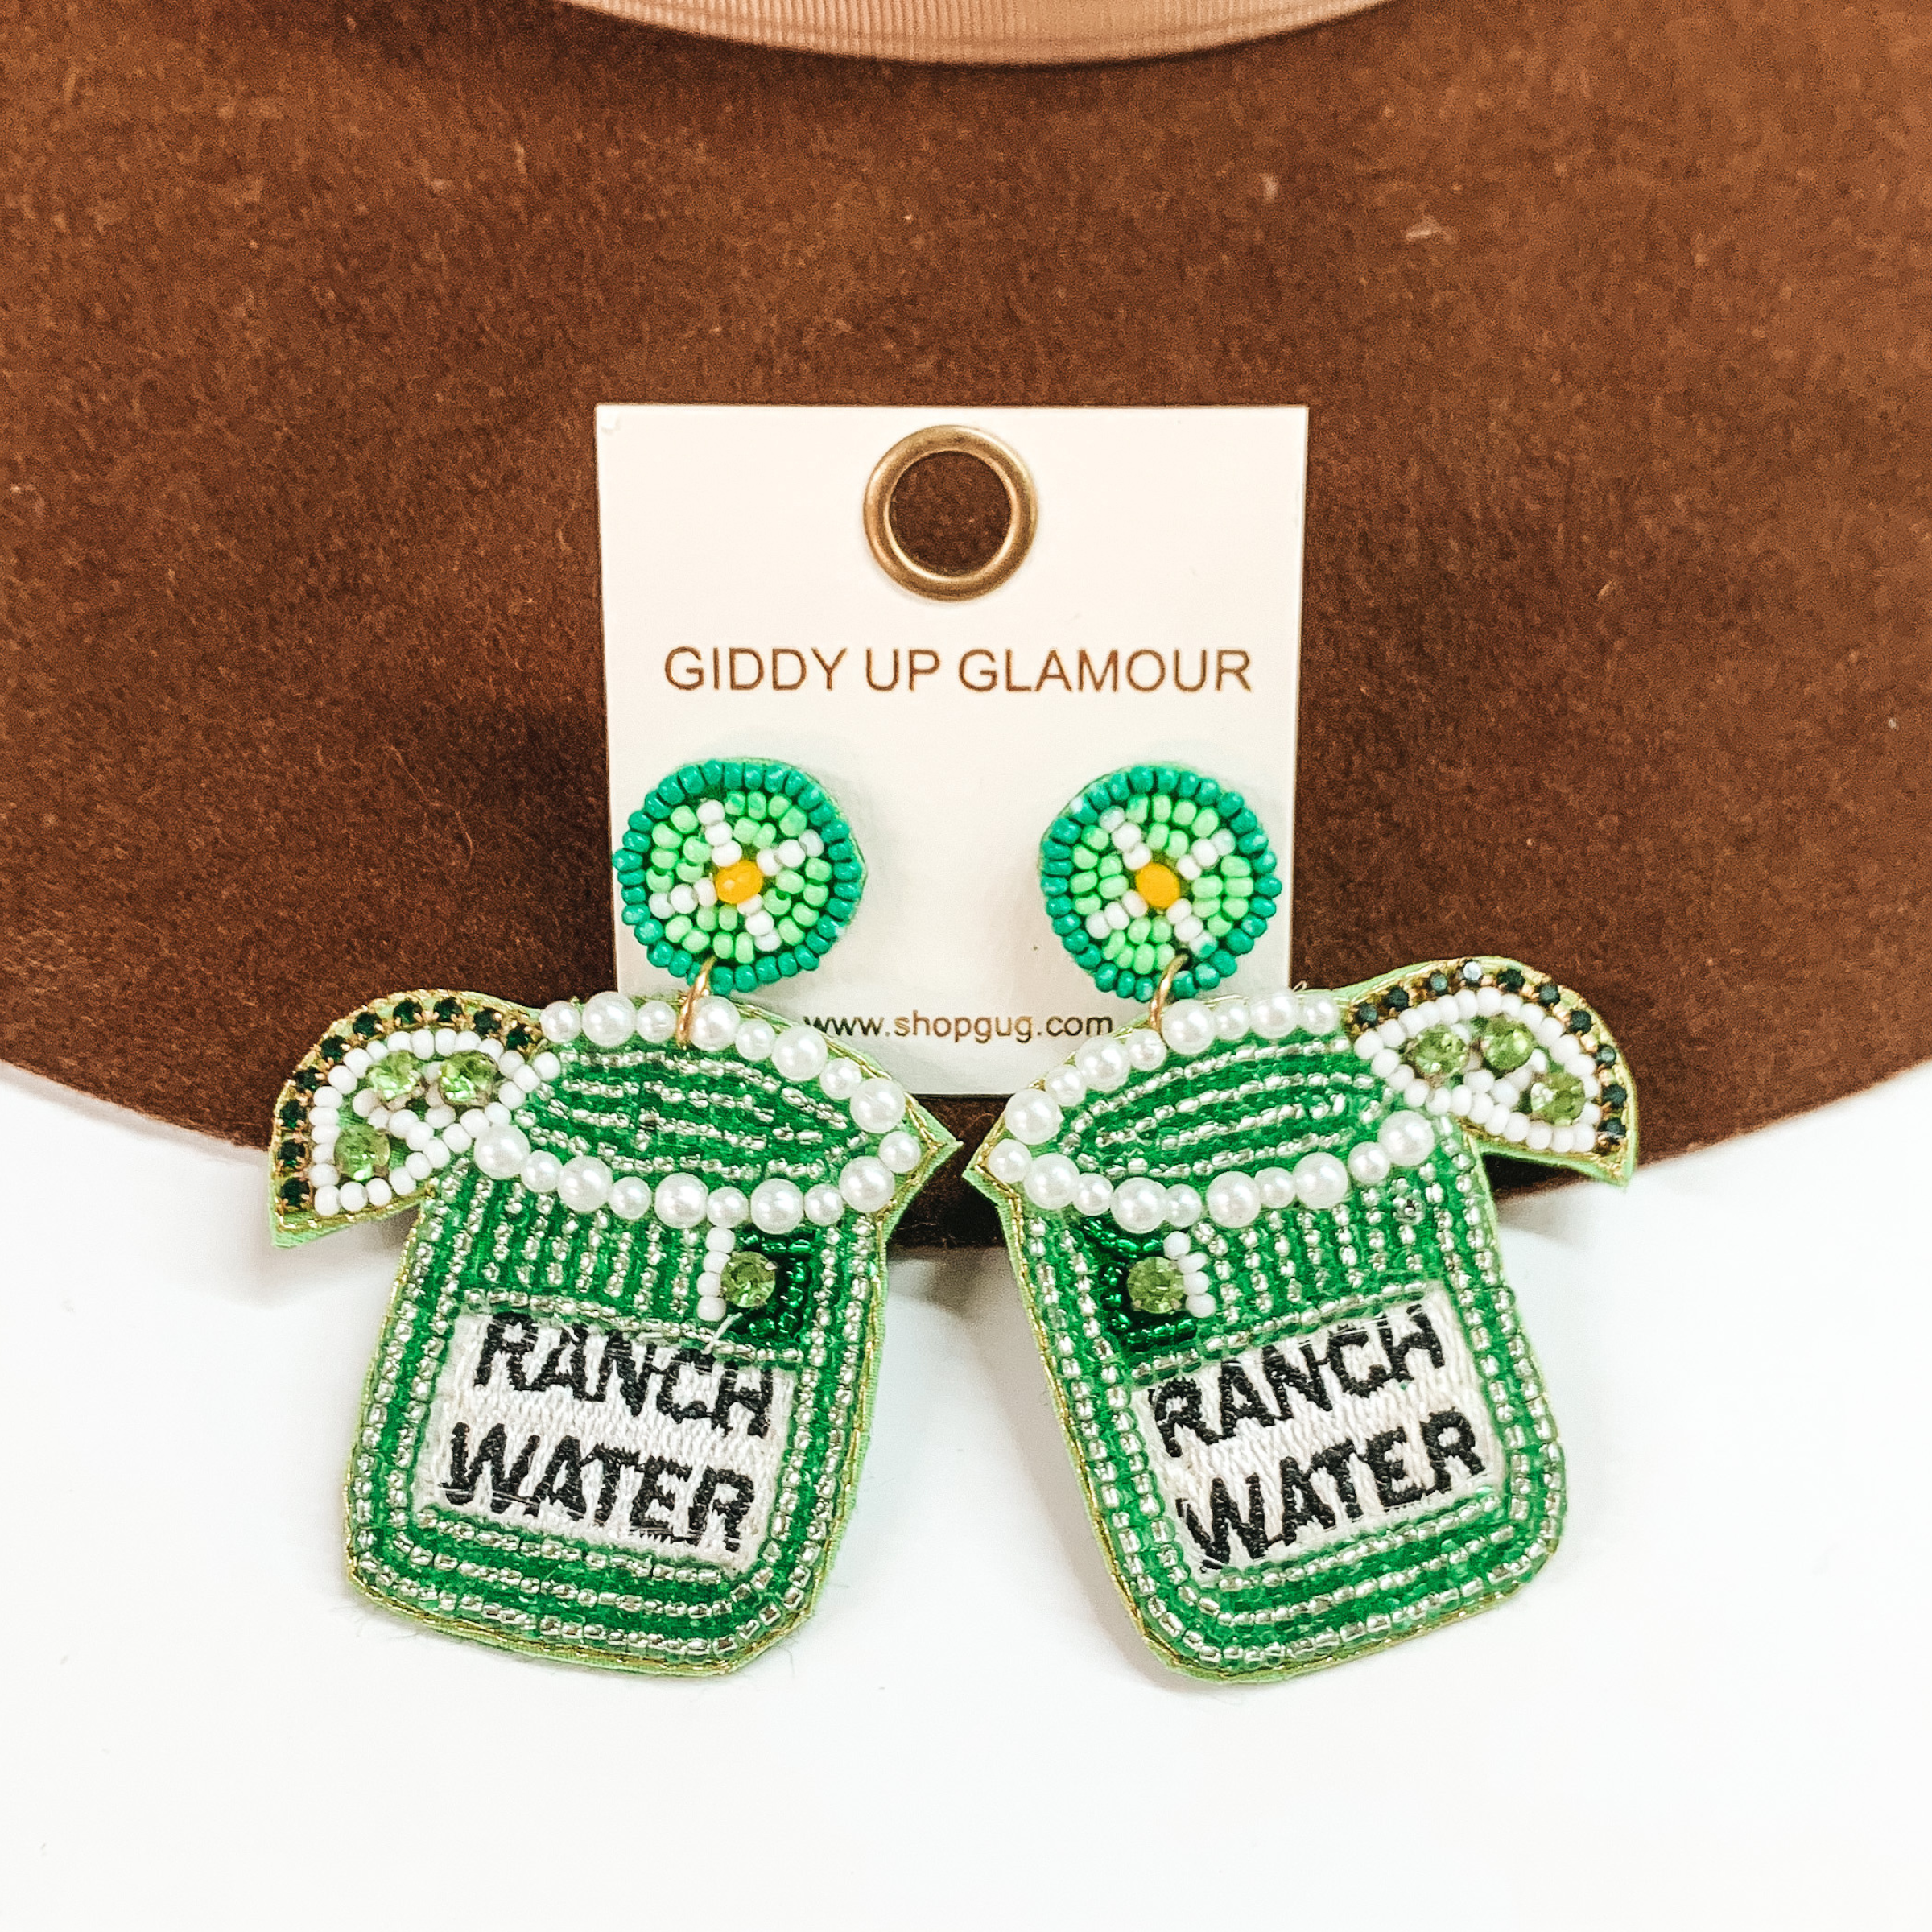 Green beaded coctail glass earrings. These earrings include a lime and the words"RANCH WATER" stitched in black. These earrings are pictured on a white and brown background.